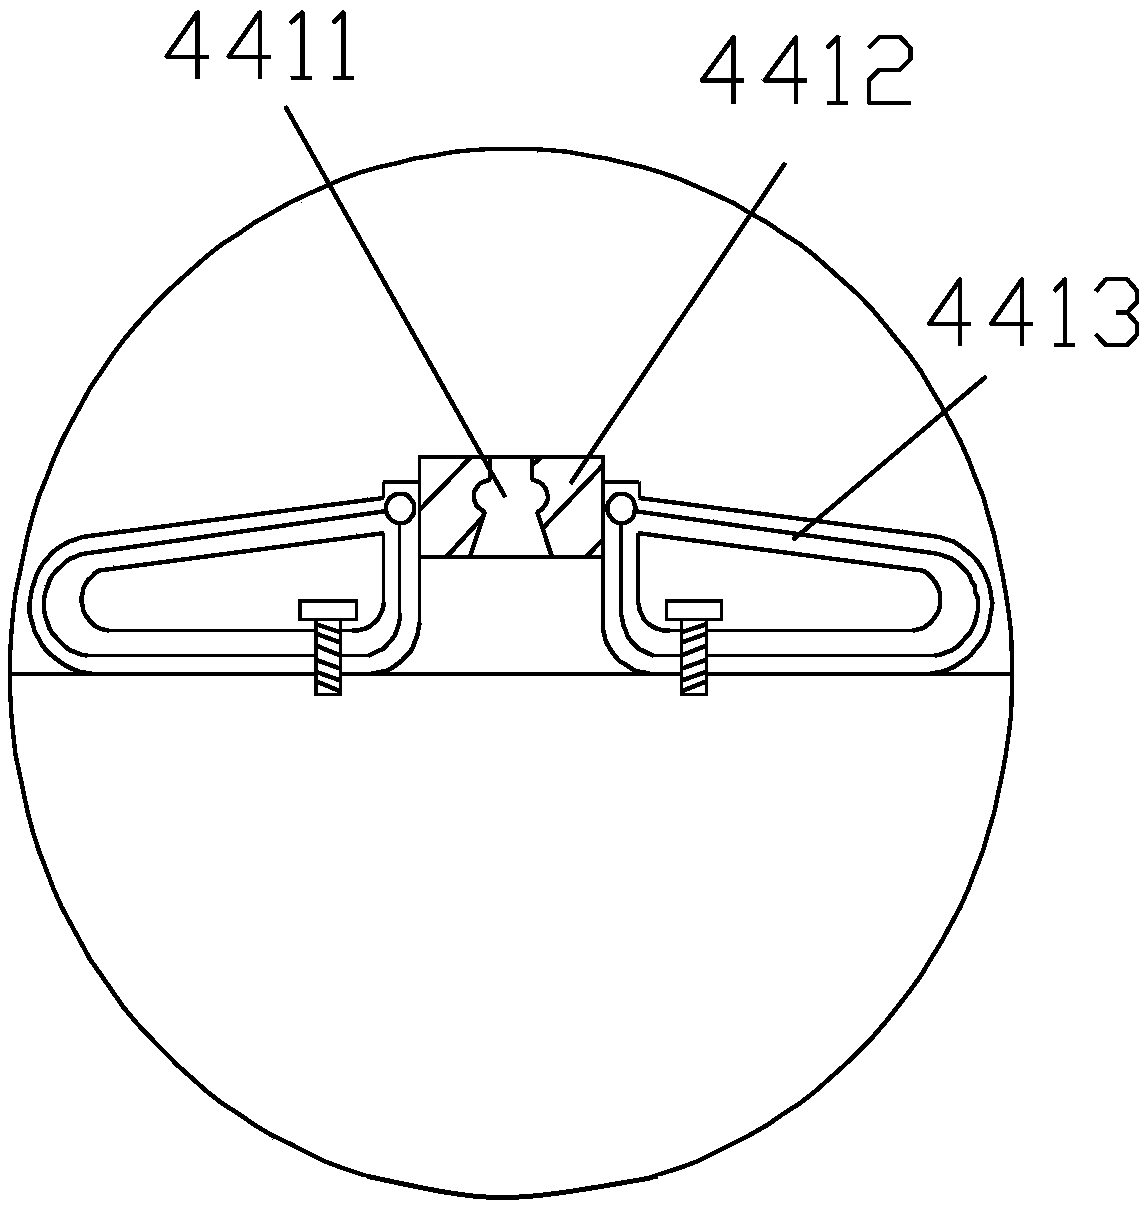 Overlay measuring device matched with four clamping blocks and used for preventing light scattering based on deformation